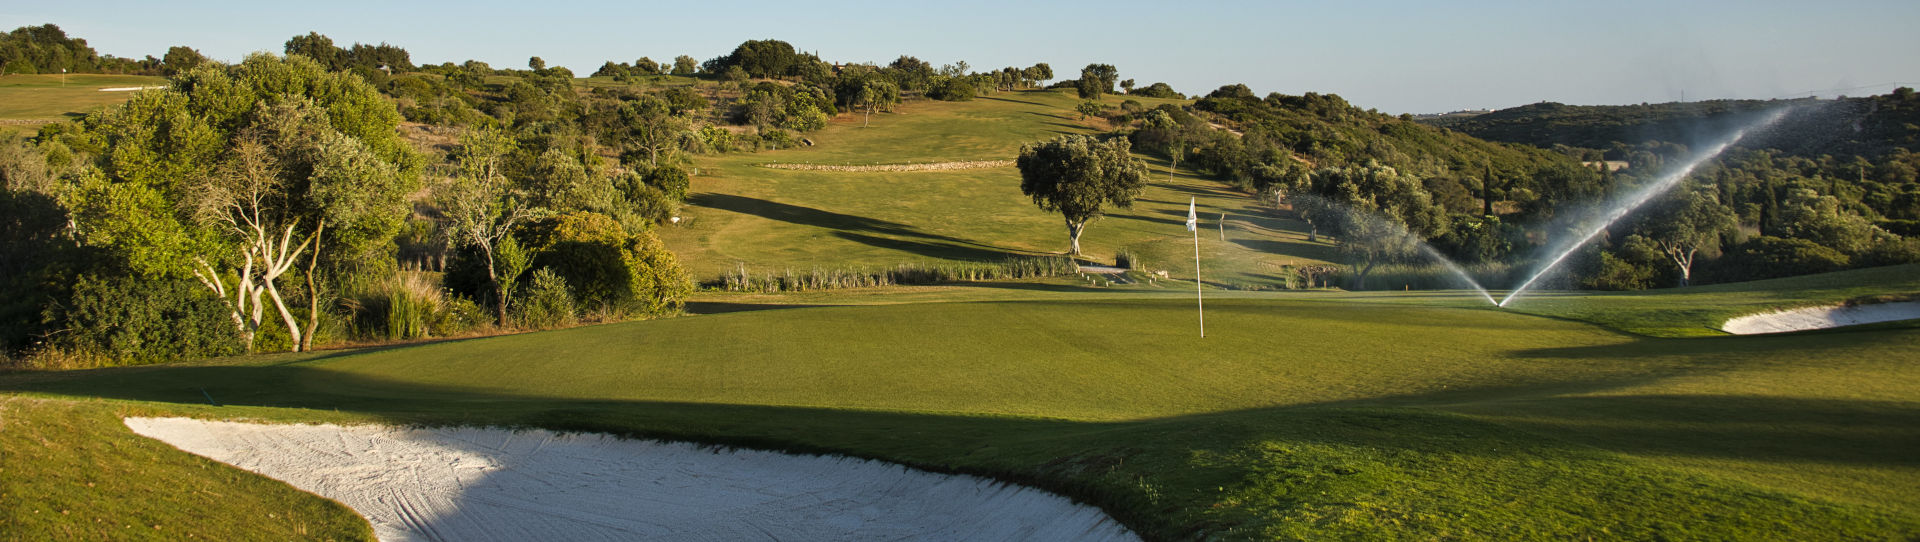 Portugal golf holidays - Espiche Duo Experience - Photo 3